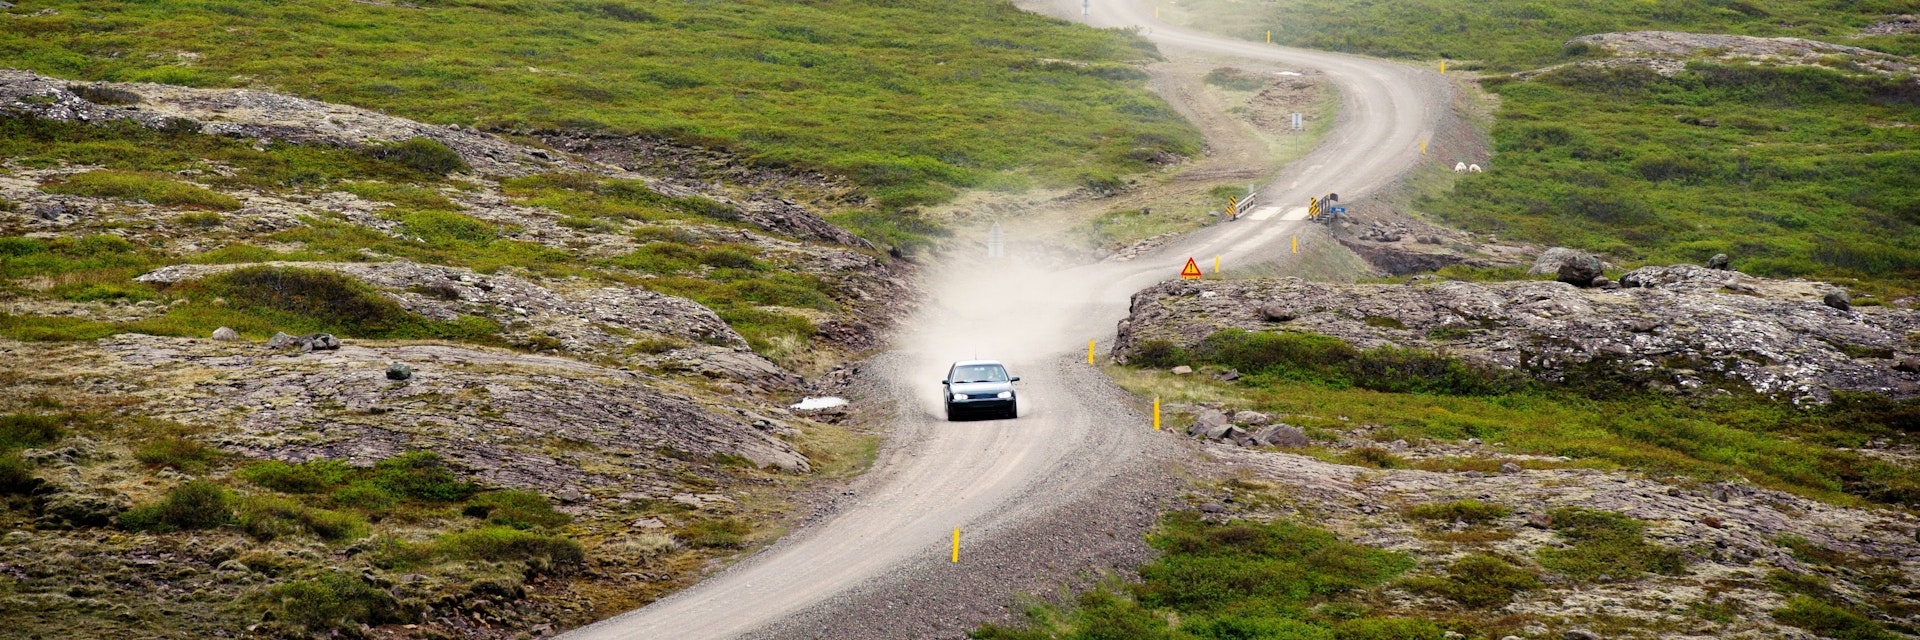 A car on the Öxi mountain pass, Eastern of Iceland - stock photo
Öxi pass is a mountain pass in eastern region, Iceland.